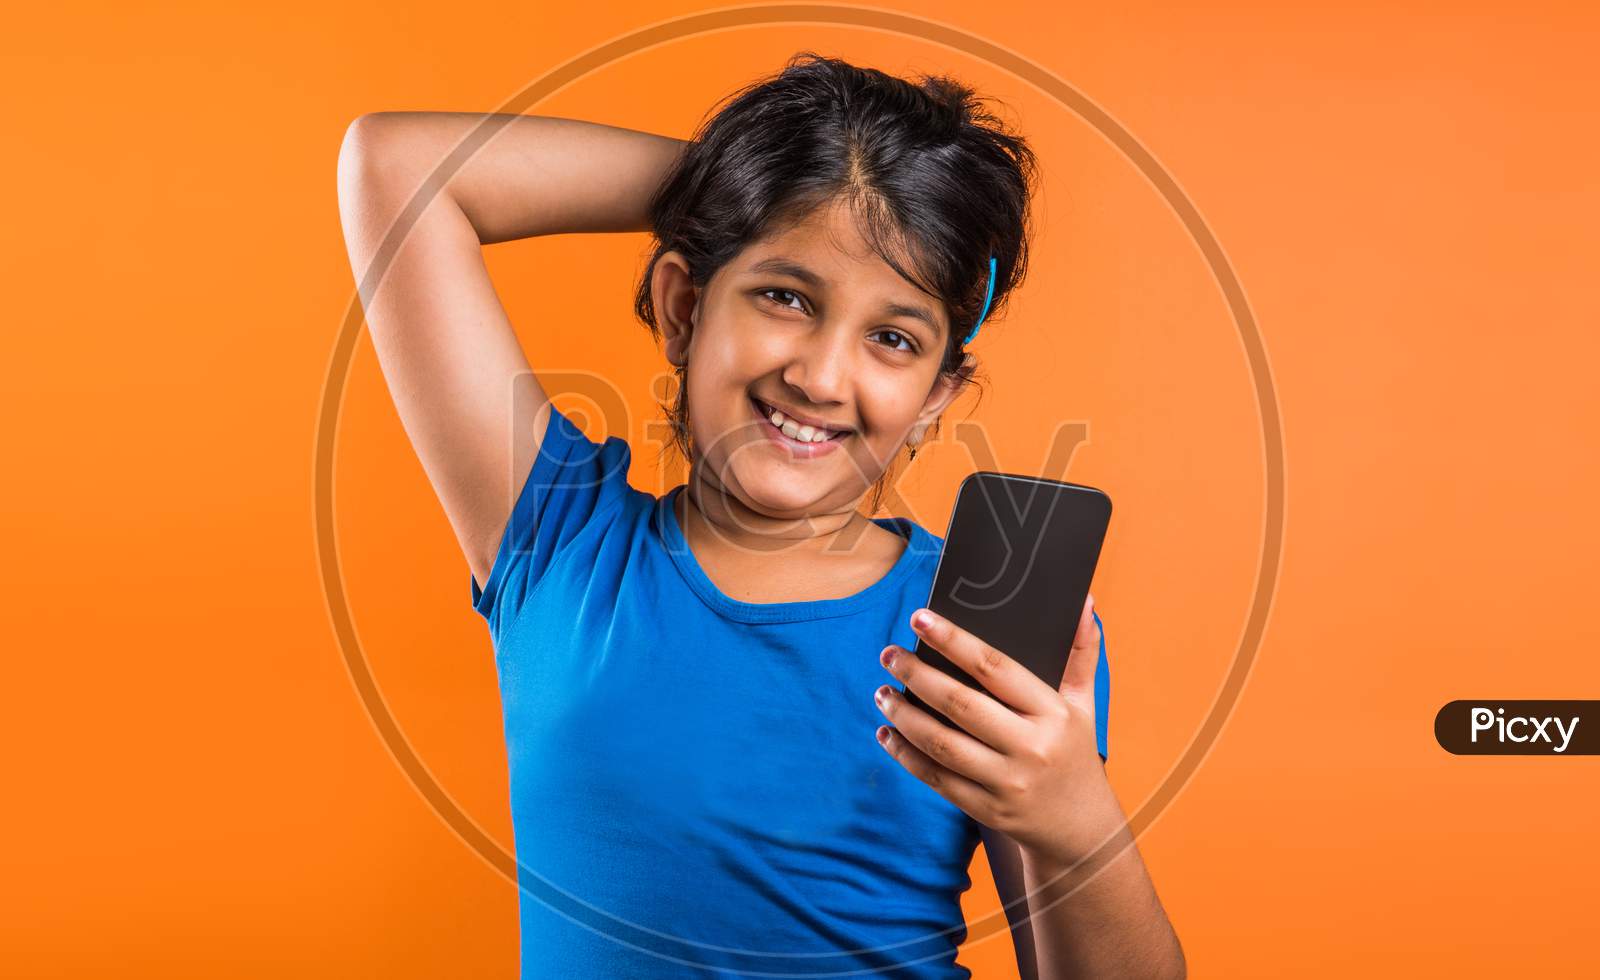 Small Girl using smartphone for playing game or taking selfie picture